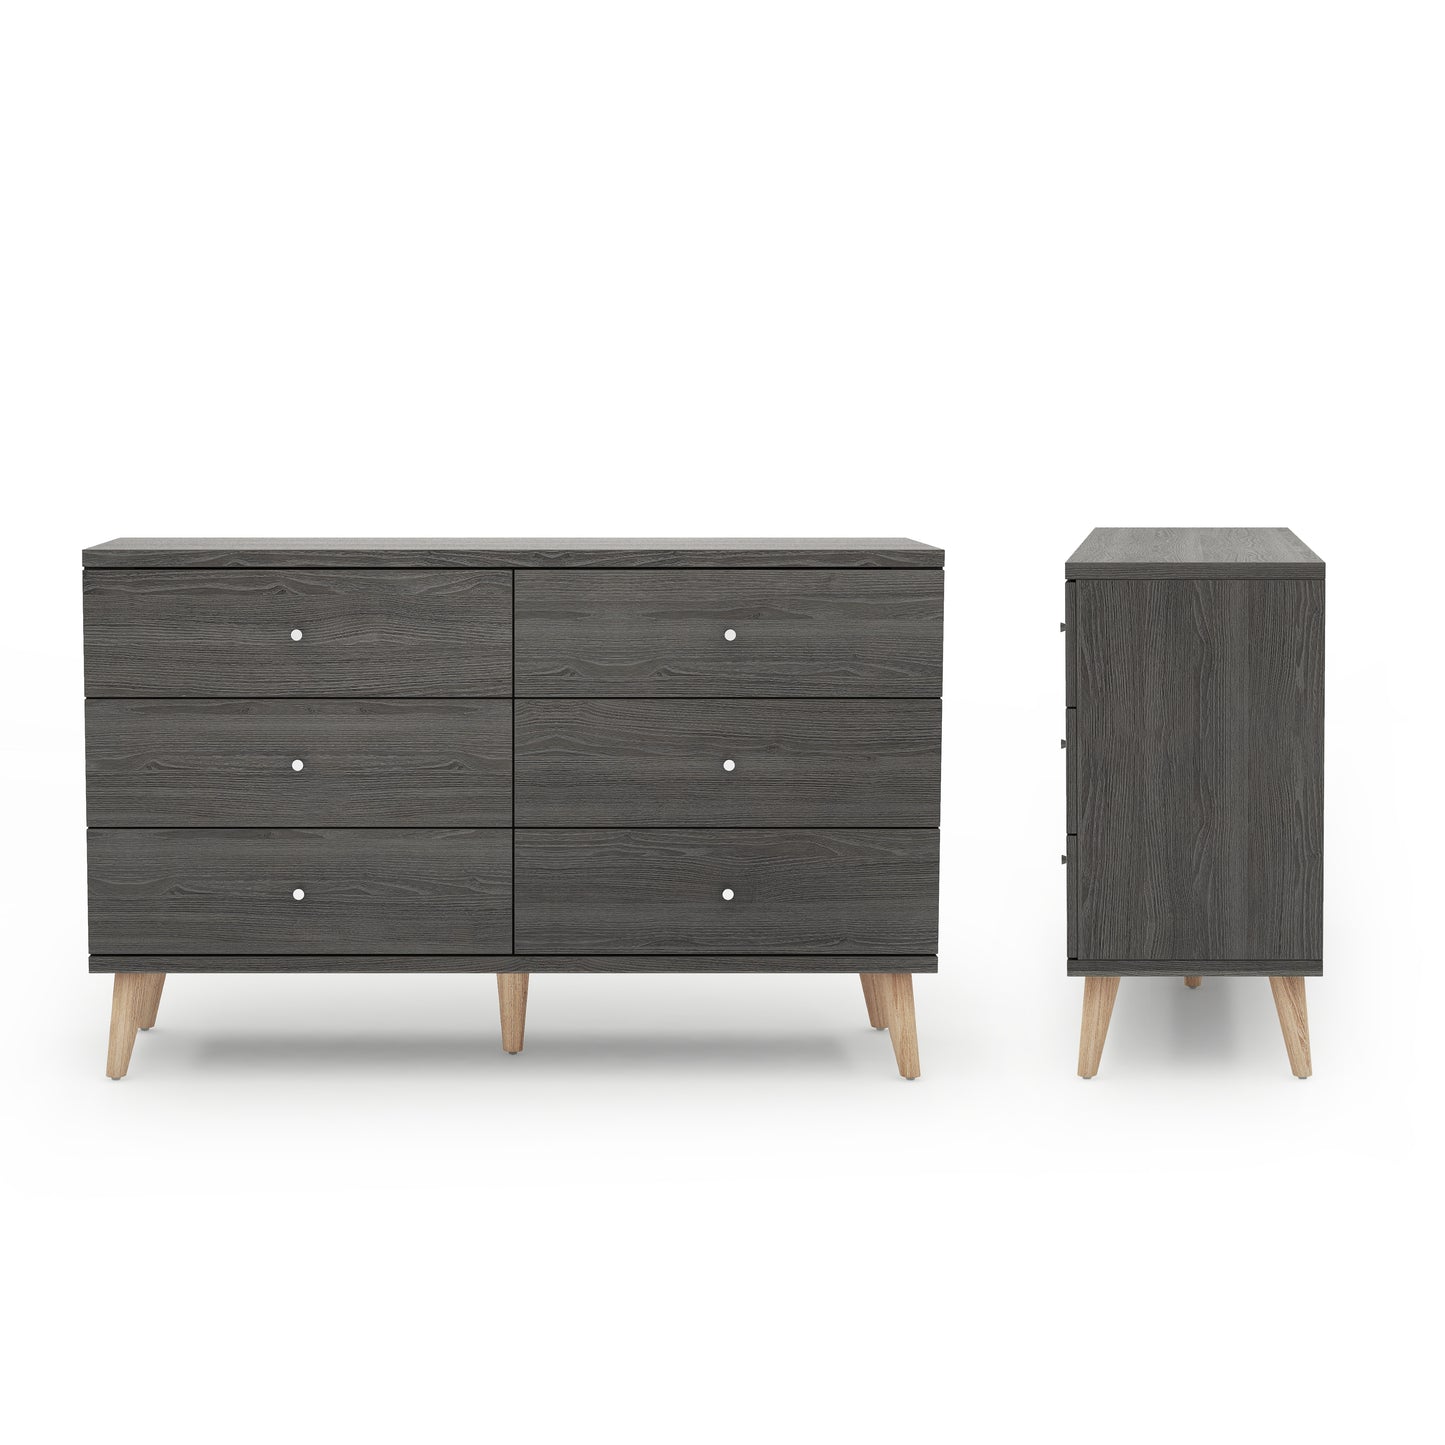 Distressed Gray 6-drawer Dresser with Knobs